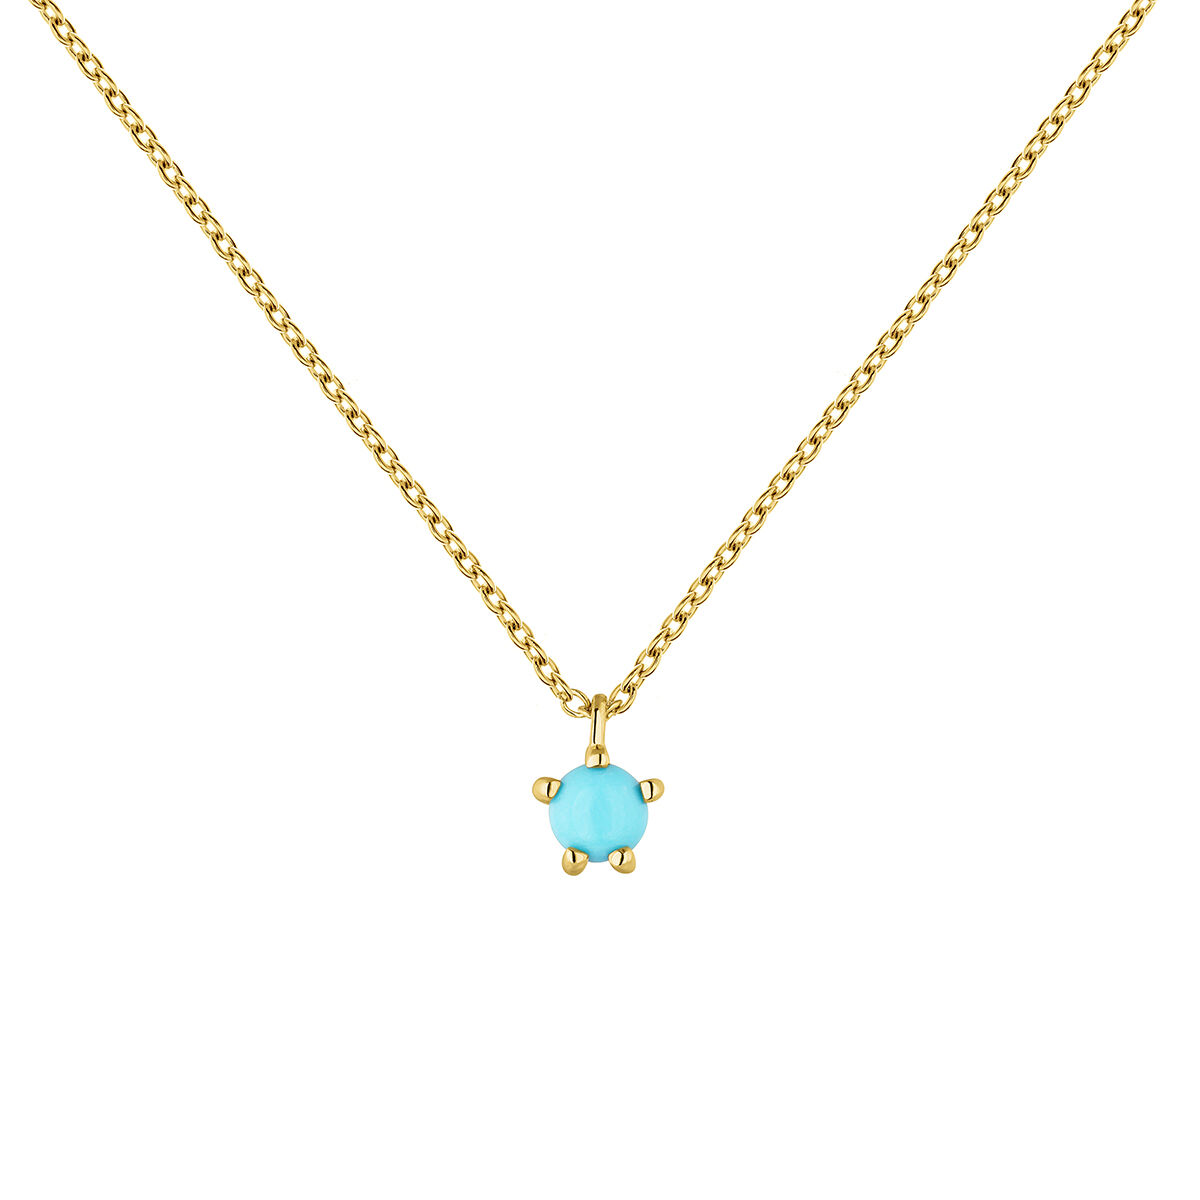 Collier turquoise or 9 ct , J04708-02-TQ, hi-res